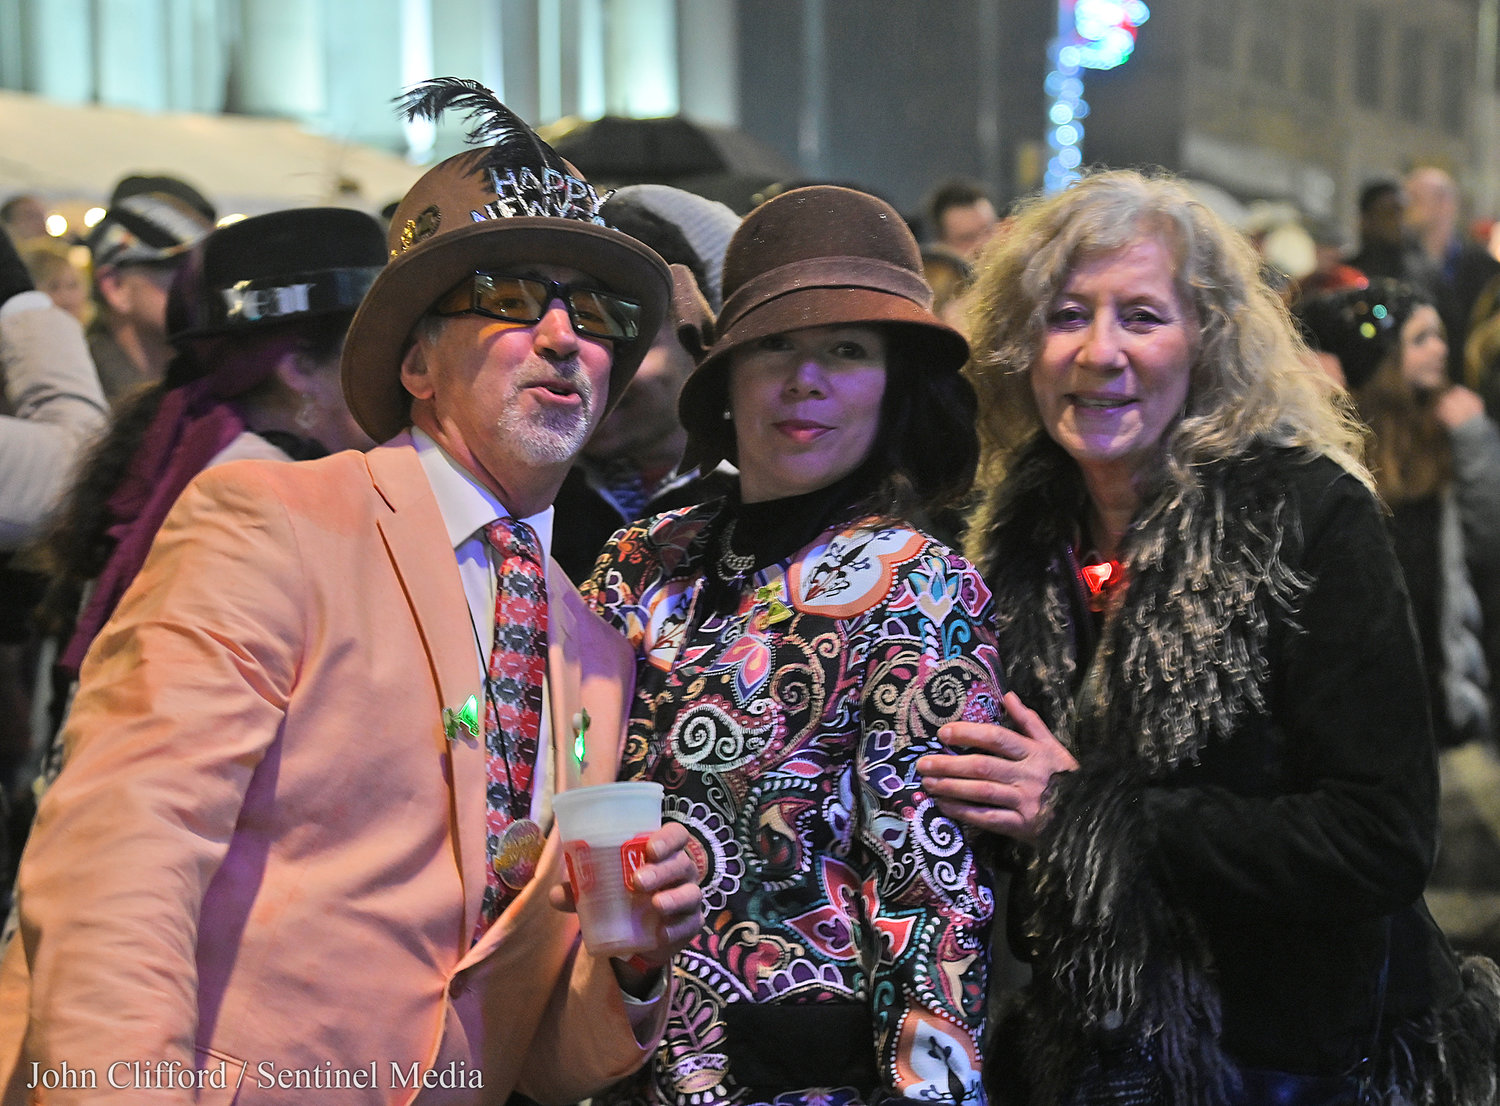 The Bank of Utica New Year's Eve celebration with happy revelers enjoying themselves in front of the stage with the Ladies of Soul and their Gentlemen performing Saturday, December 31, 2022.